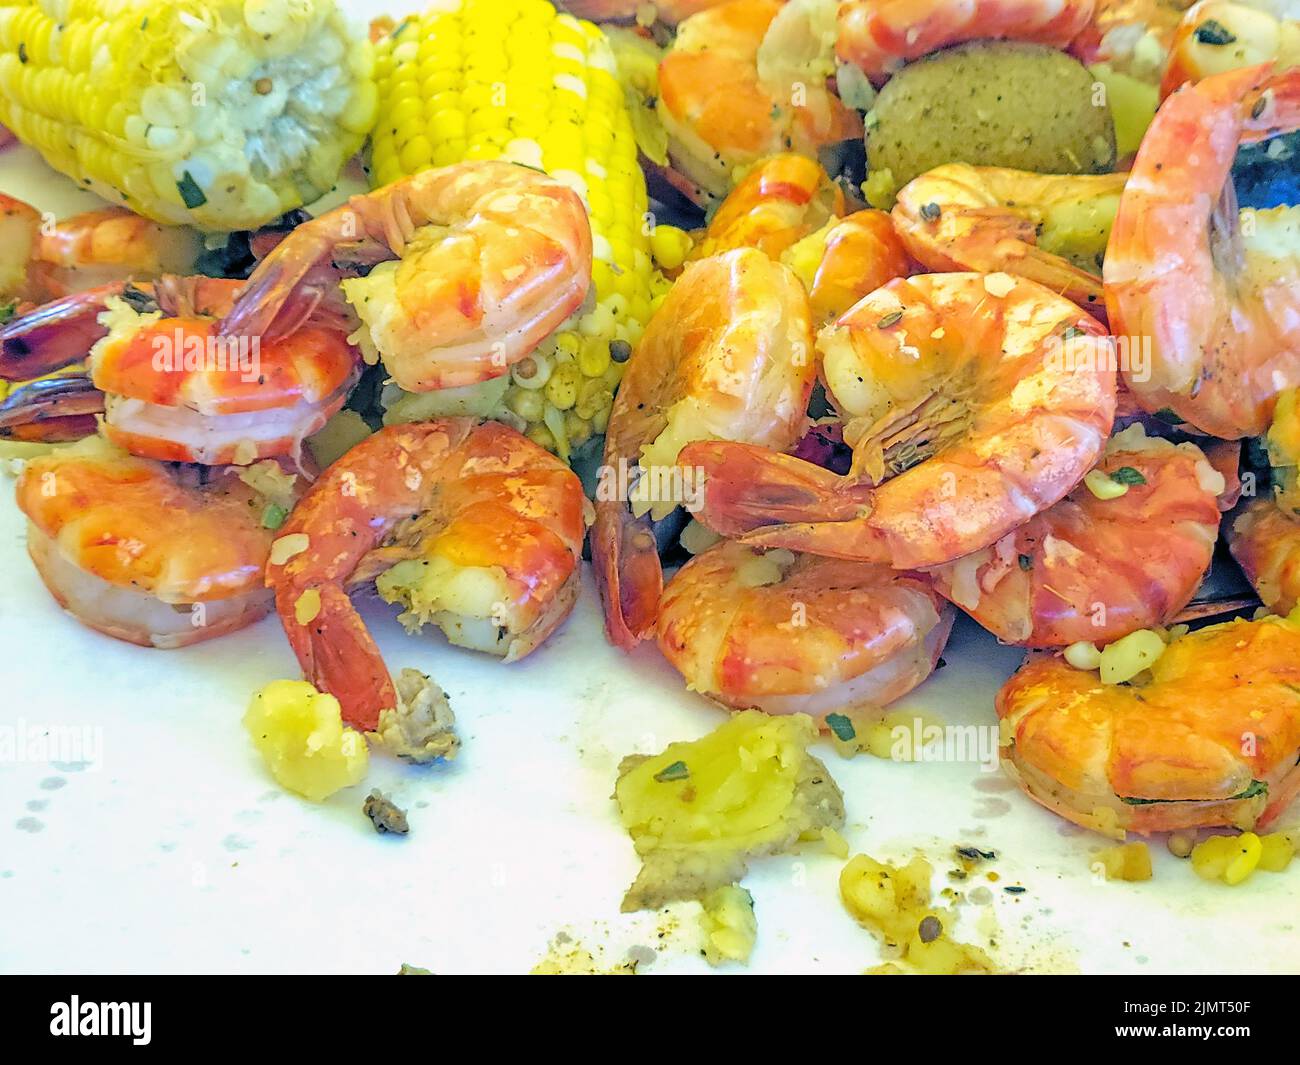 Close up of cooked shrimp, corn on the cob, and potatoes Stock Photo